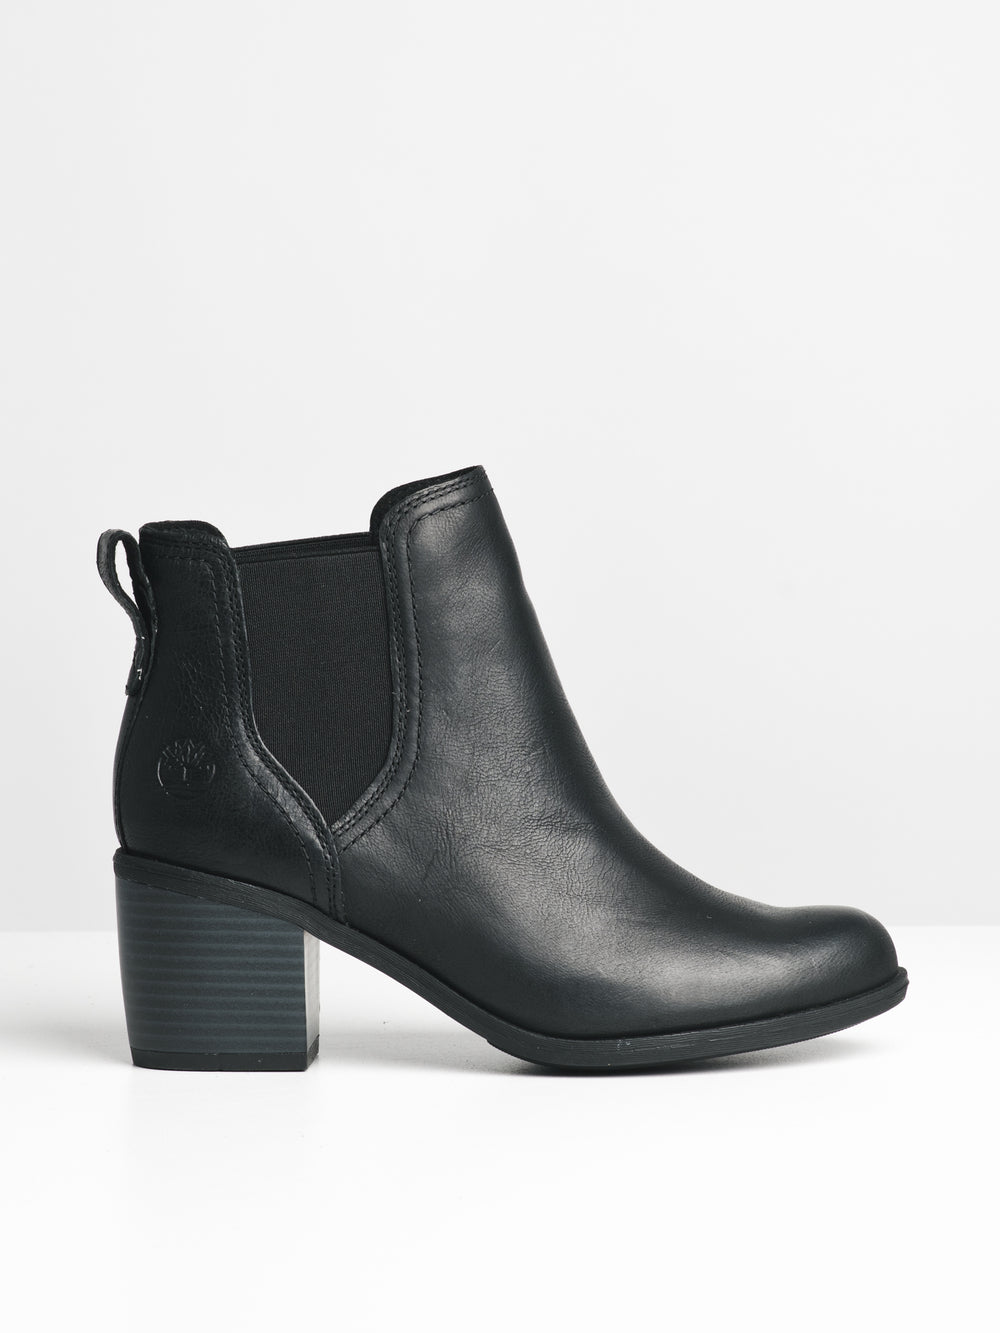 WOMENS BRYNLEE PARK CHELSEA - BLK - CLEARANCE